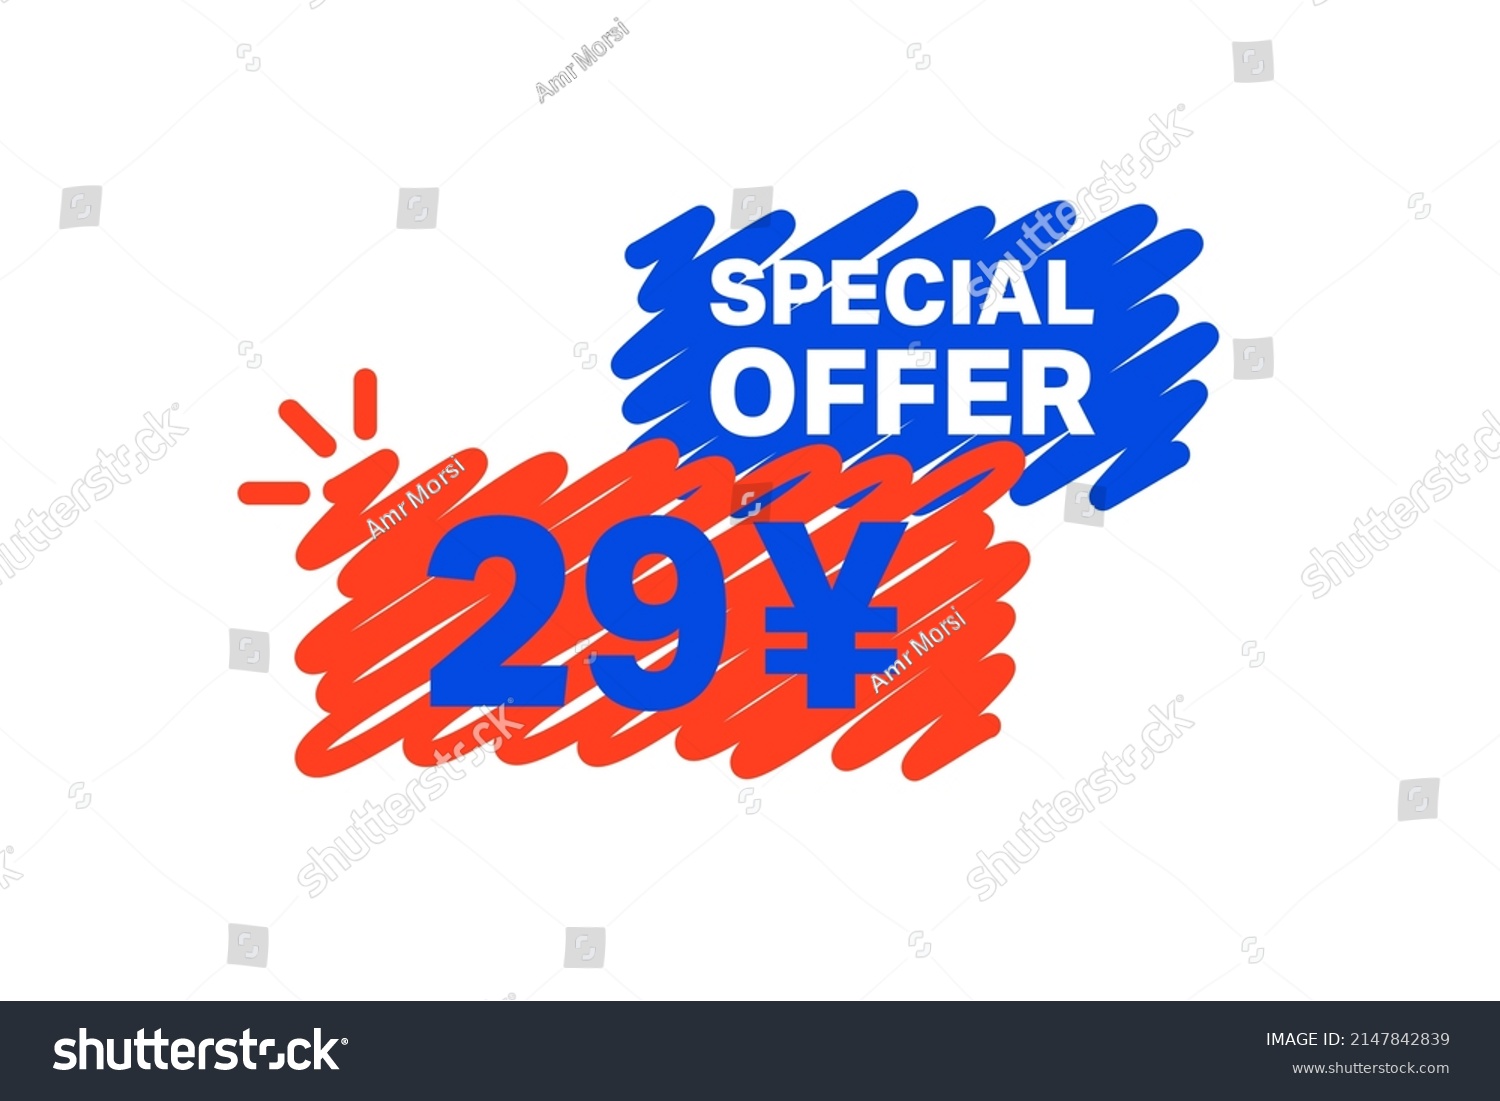 SVG of 29 Yen OFF Sale Discount banner shape template. Super Sale 29 Yuan Special offer badge end of the season sale coupon bubble icon. Modern concept design. Discount offer price tag vector illustration. svg